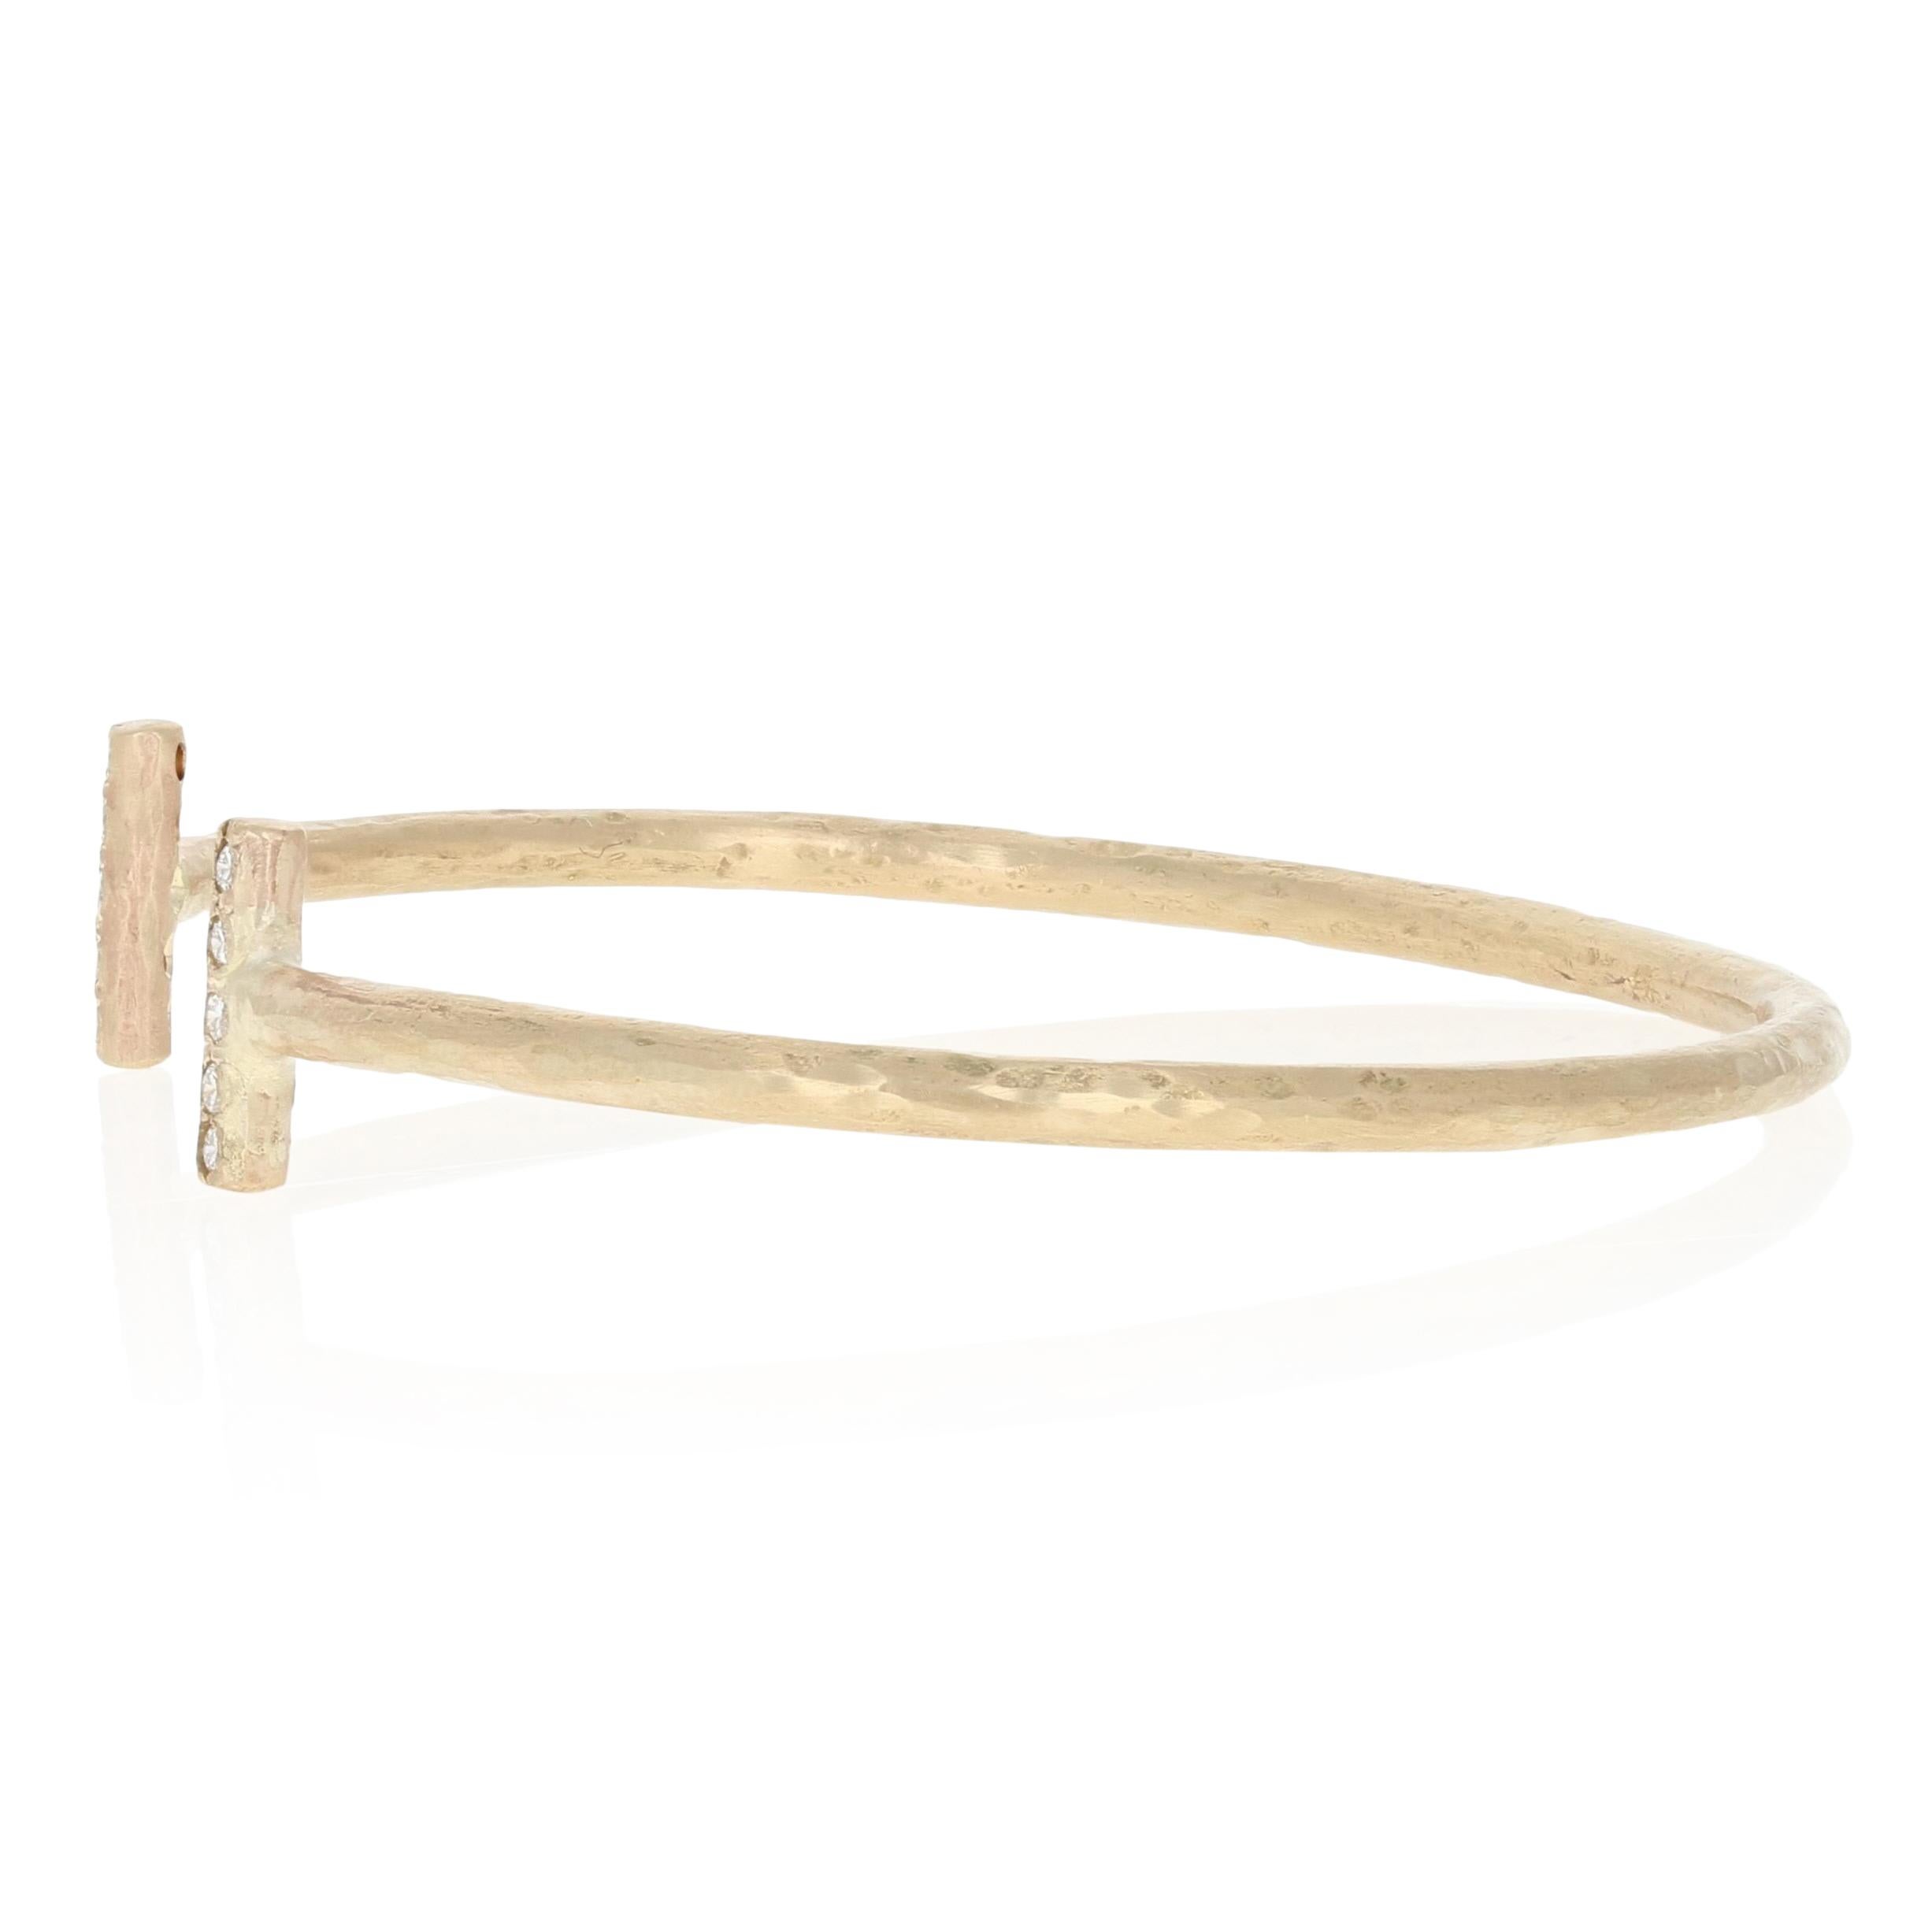 Celebrate the special woman in your life with this custom-made bracelet! Appropriately titled “Joy” and featuring a sleek oval silhouette, this NEW hammered cuff is beautifully crafted in 14k yellow gold and sparkles with ten white diamonds.  